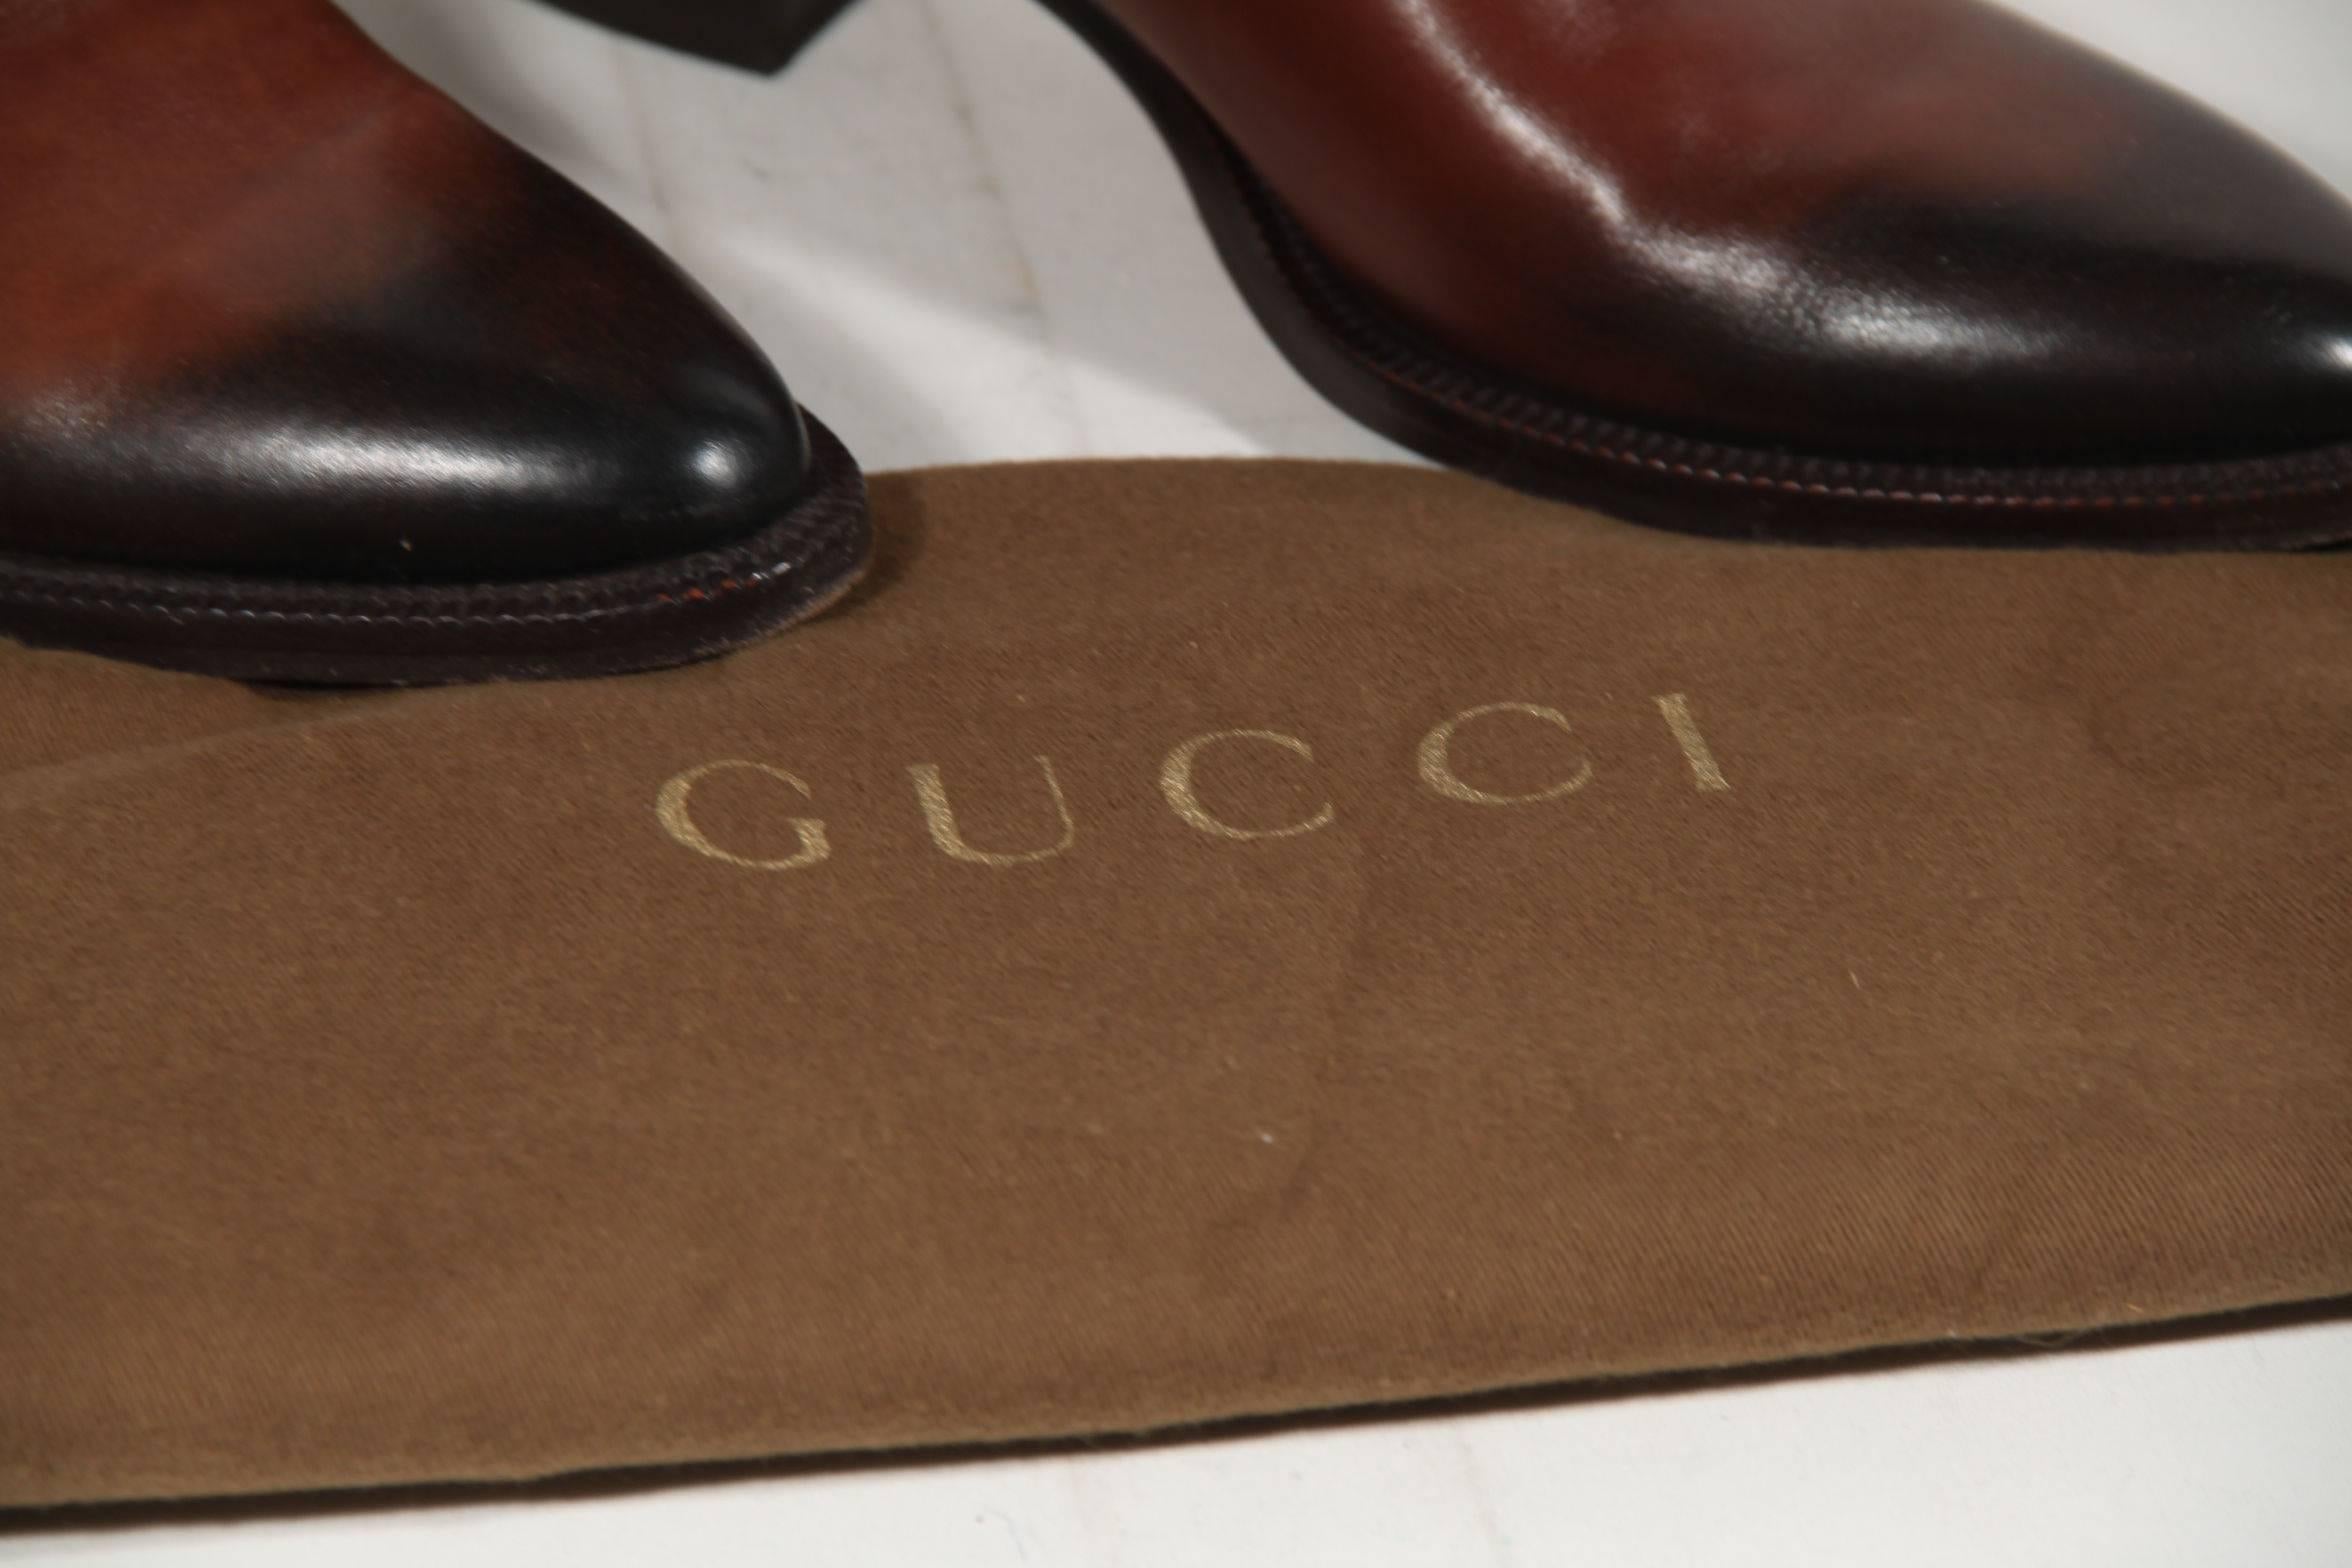 gucci western boots